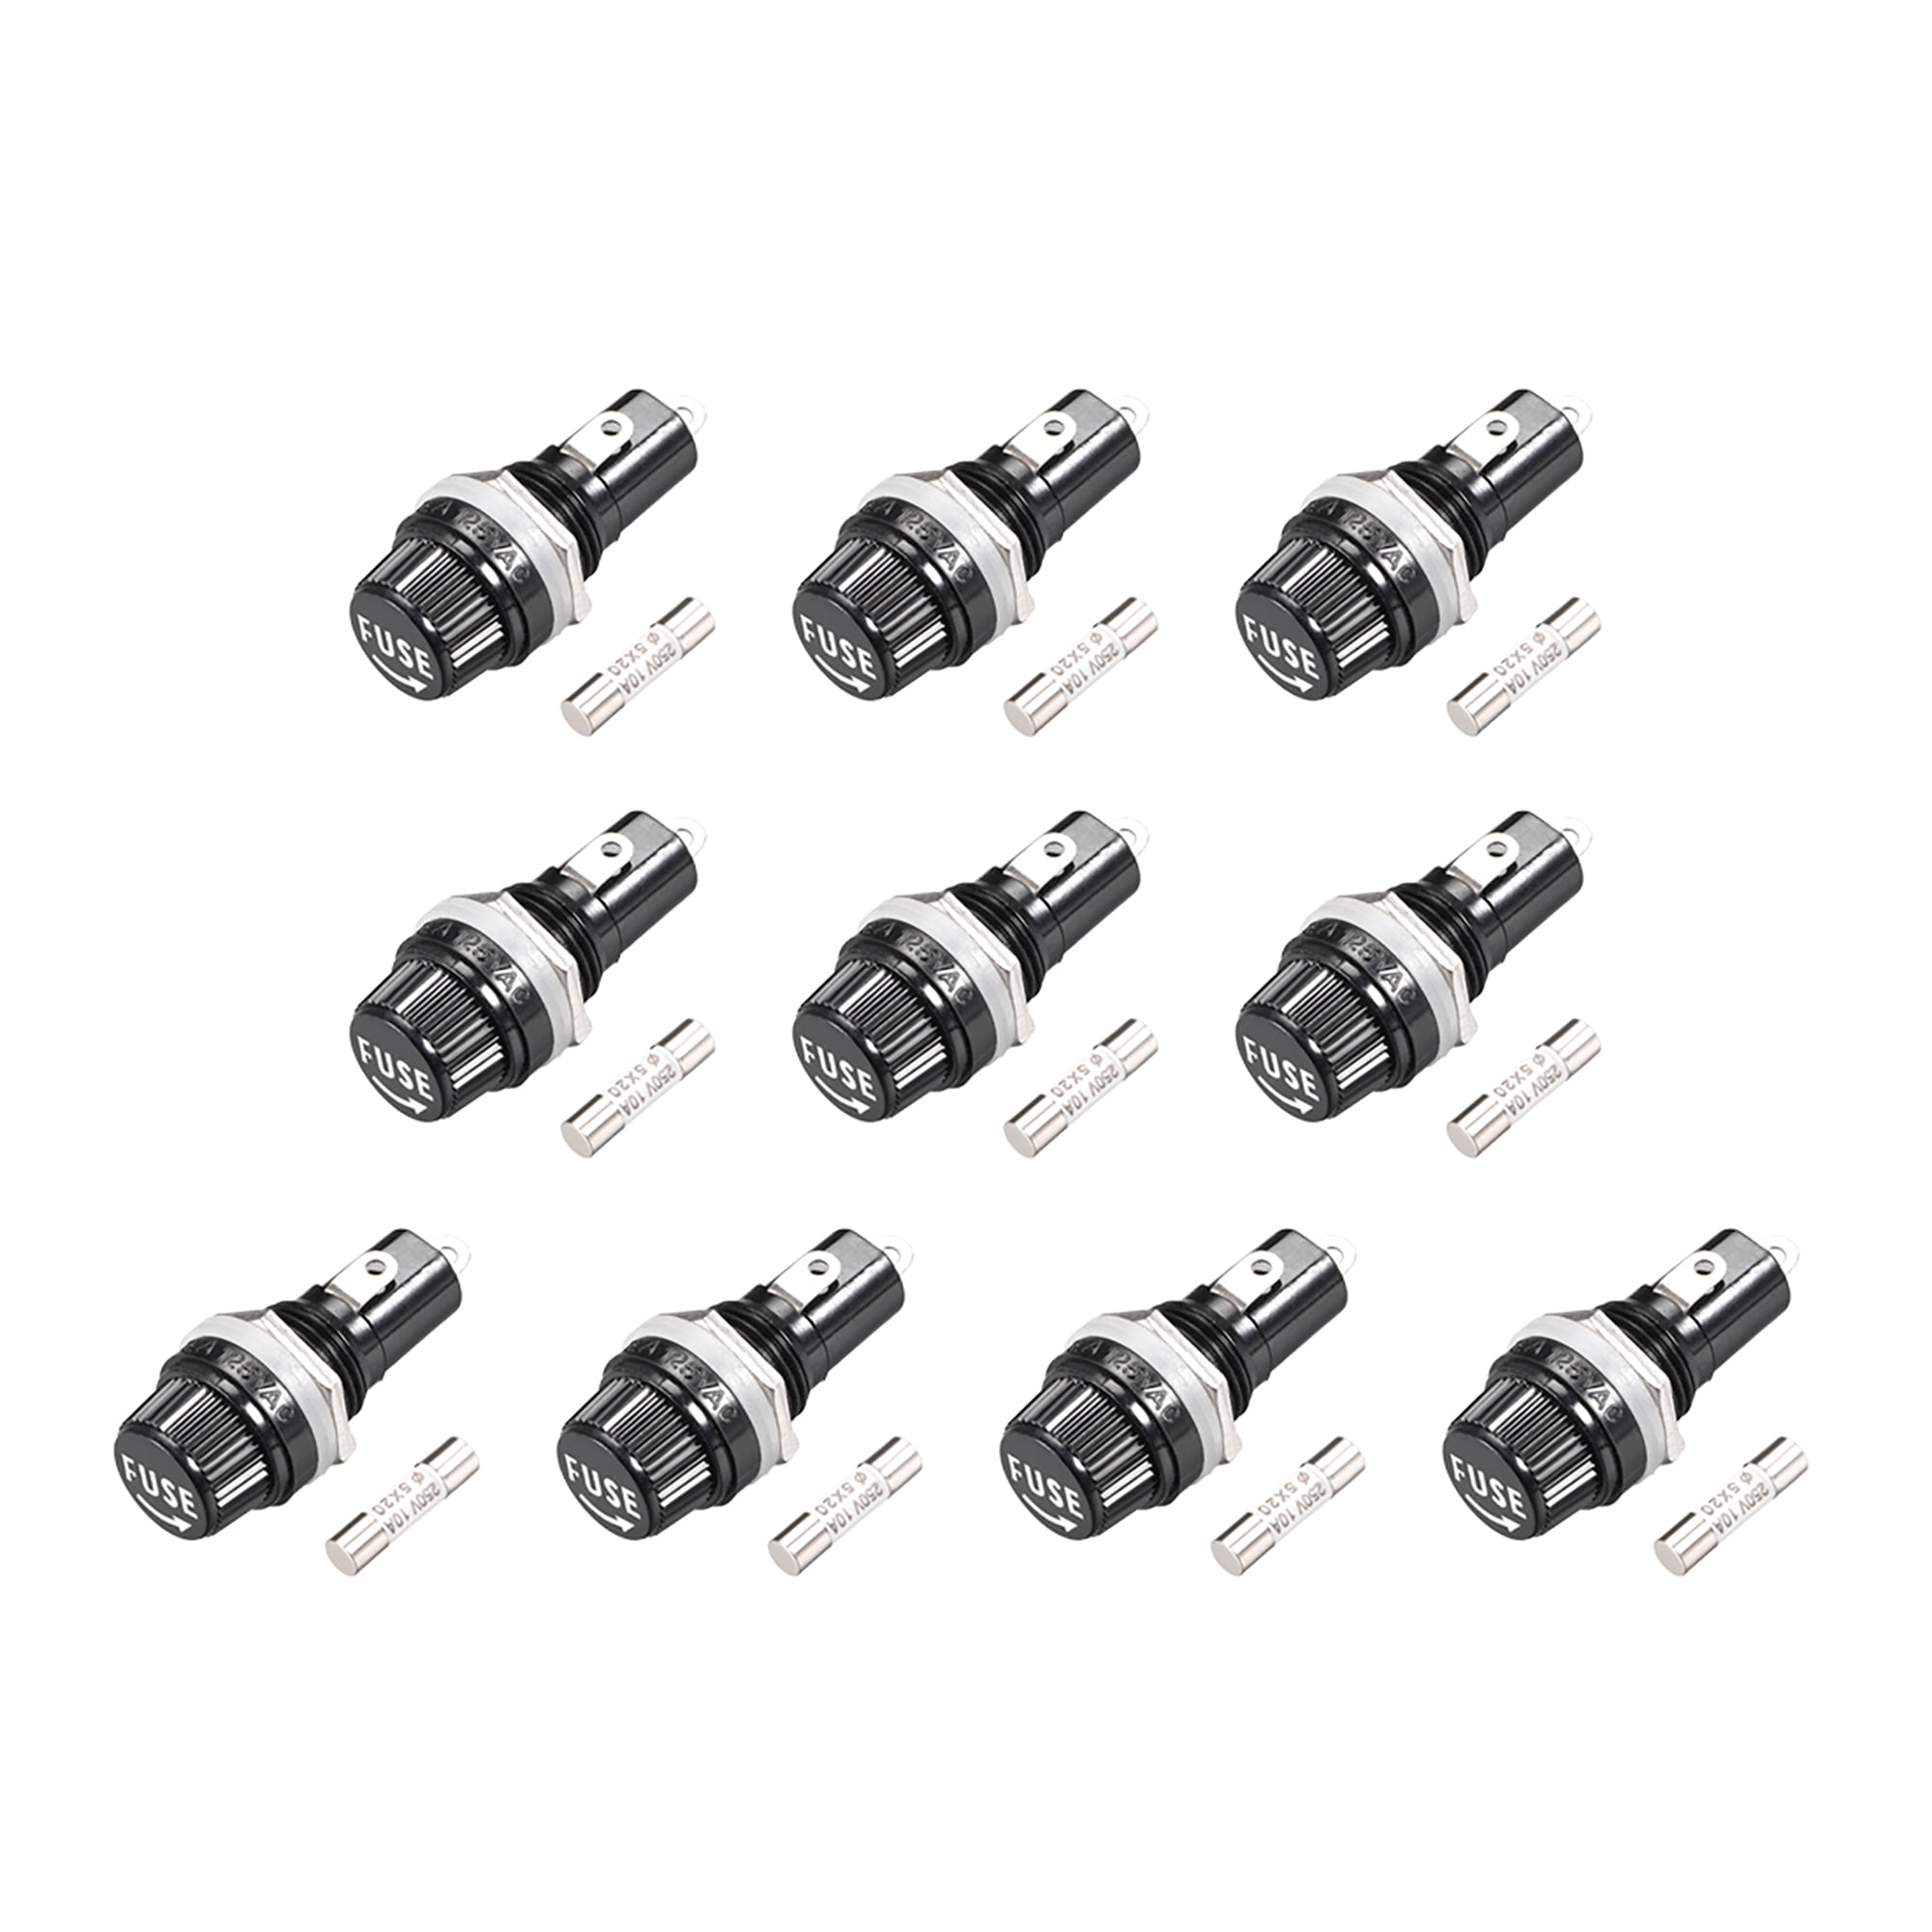 uxcell Screw Cap Panel Mounted Fuse Holder AC 125V/15A 250V/10A with 5 x 20mm Ceramics Fuse 5Set 